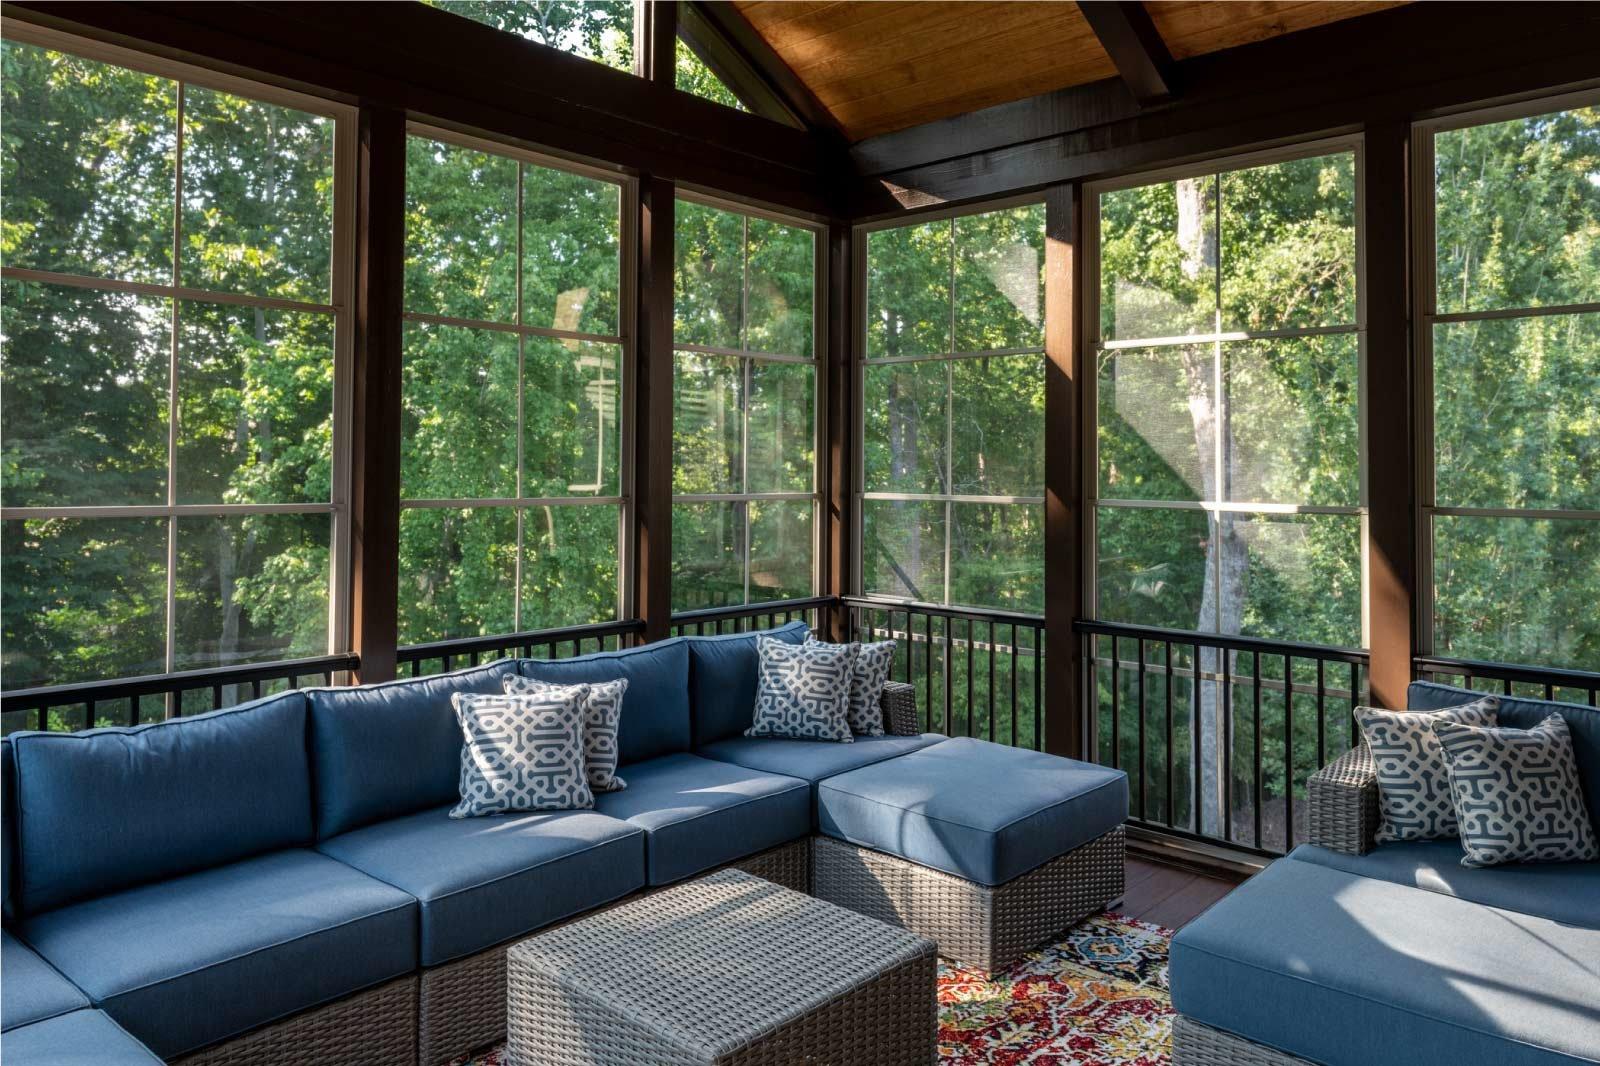 What Does a Screened in Patio Cost?